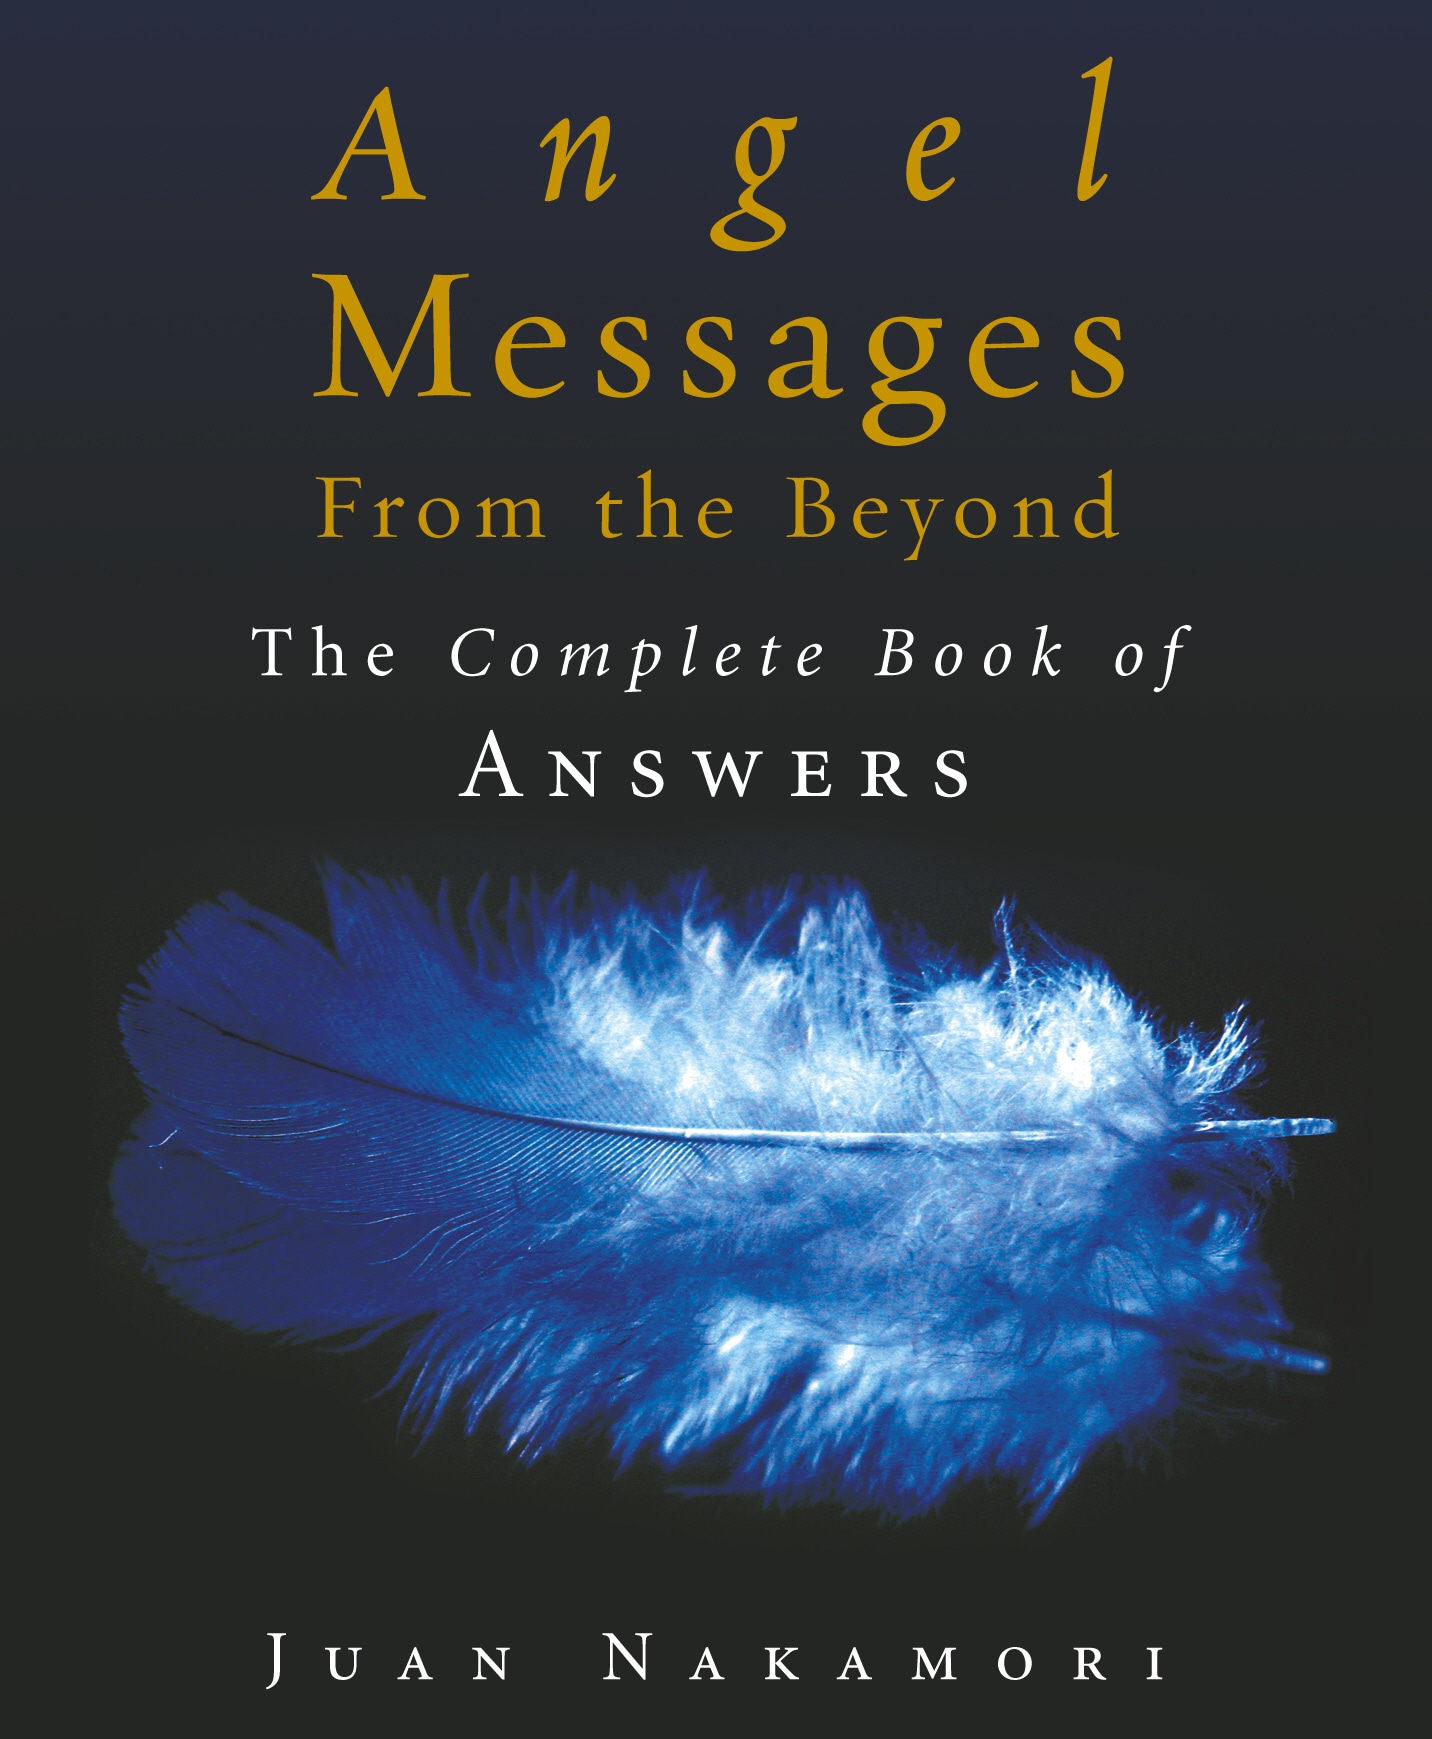 Book “Angel Messages from the Beyond” by Juan Nakamori — September 12, 2019